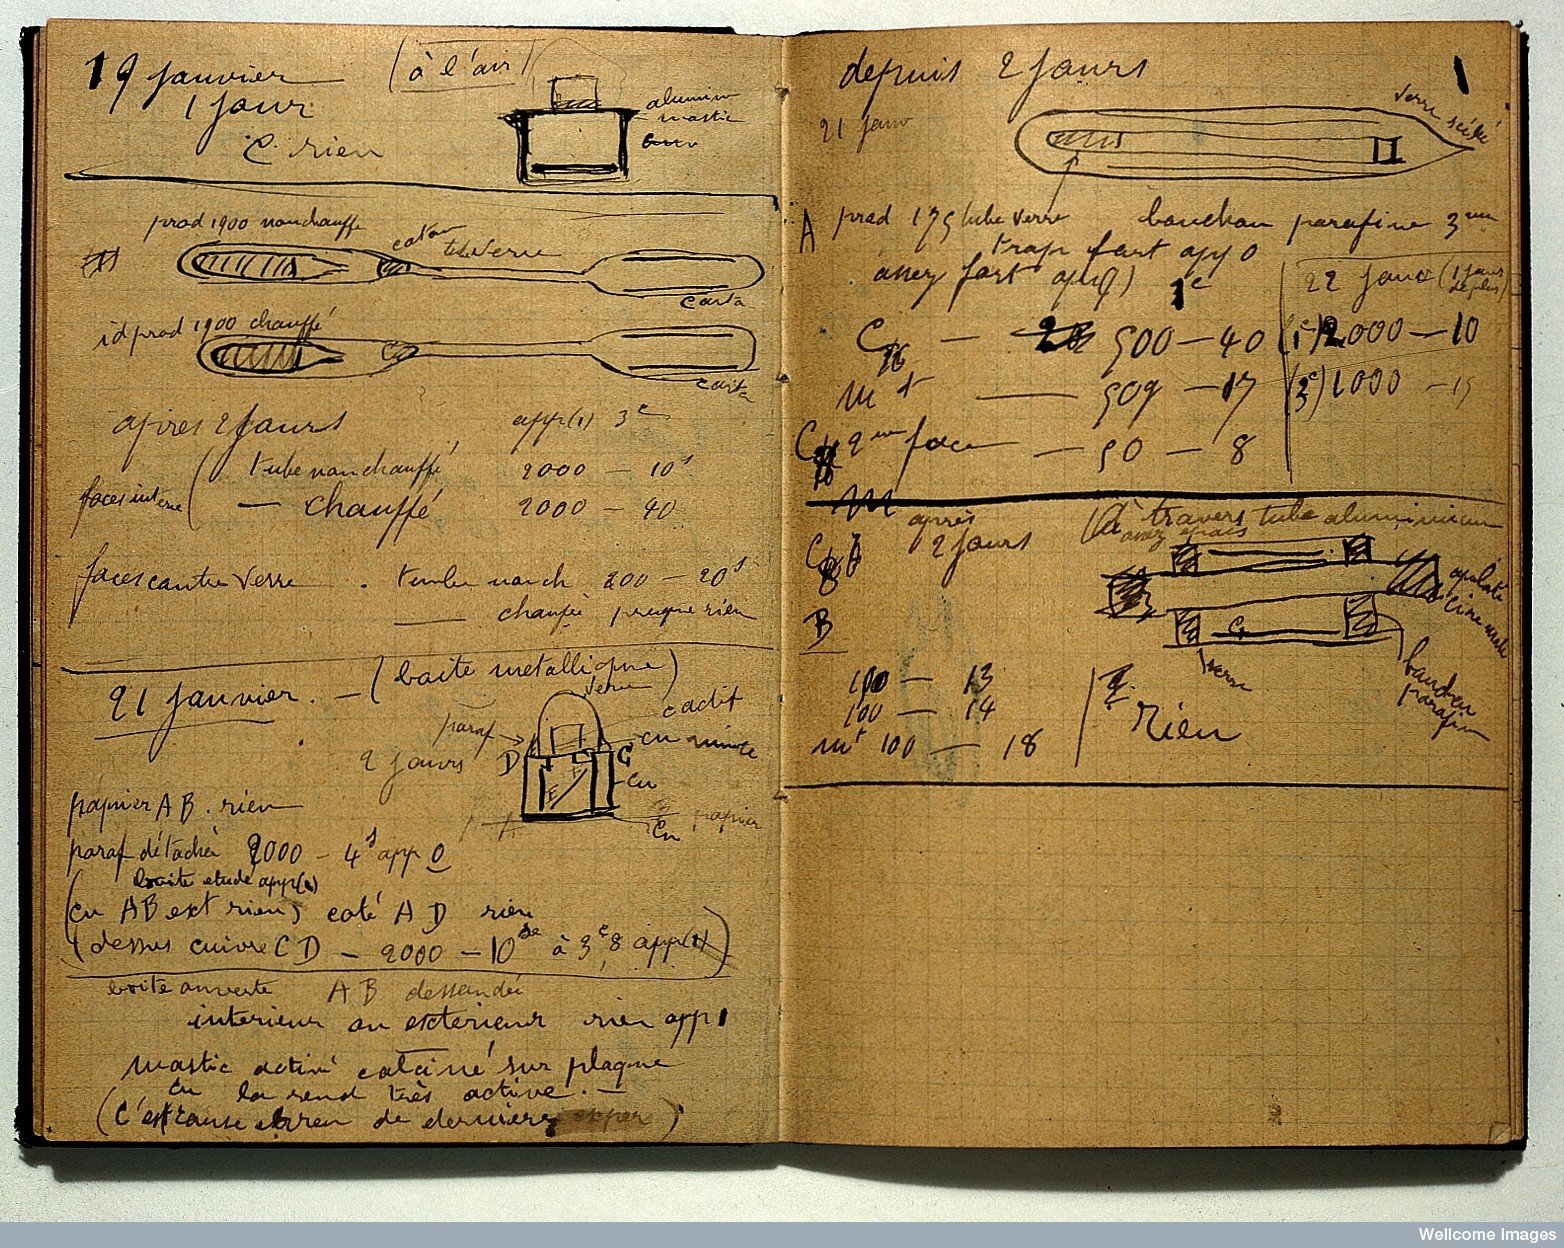 Marie Curie's manuscripts from her research on radioactive elements